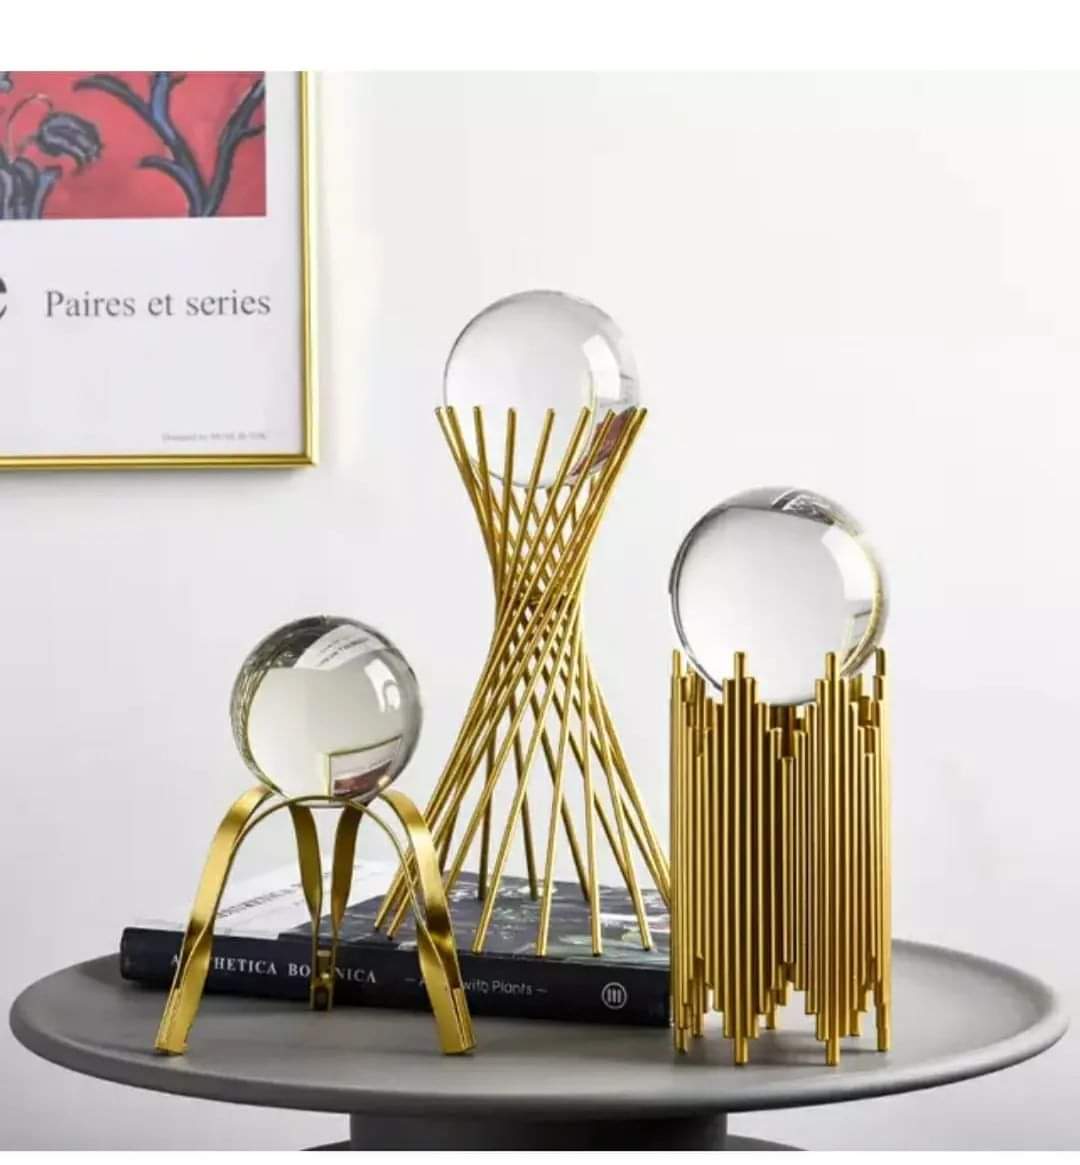 3in 1 Golden Glass crystal home/office decor